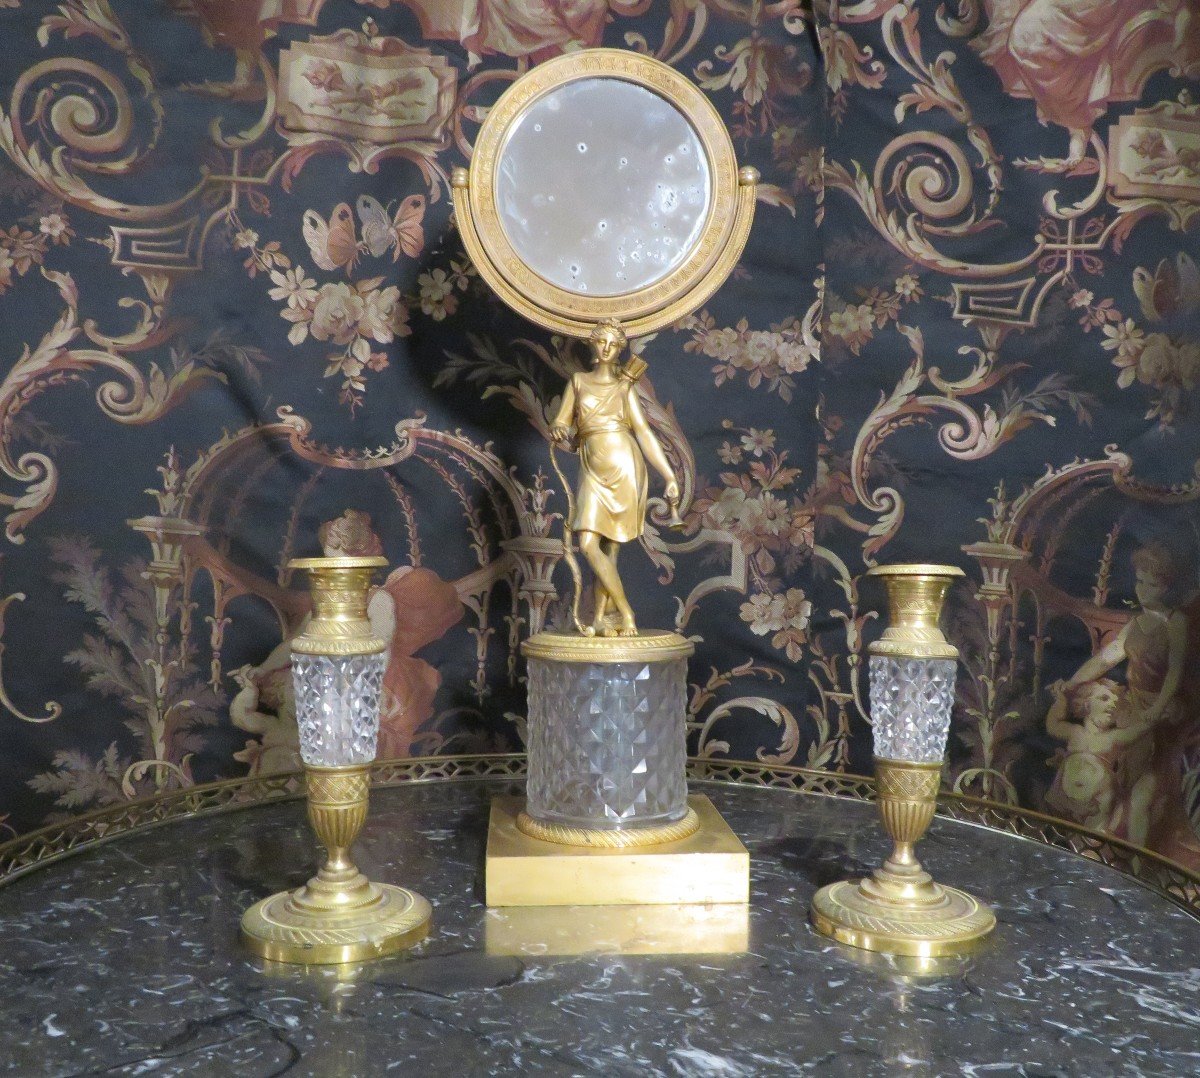 Psyche & Toilet Candlesticks In Bronze And Crystal Empire A Decor Of Diana The Huntress Nineteenth